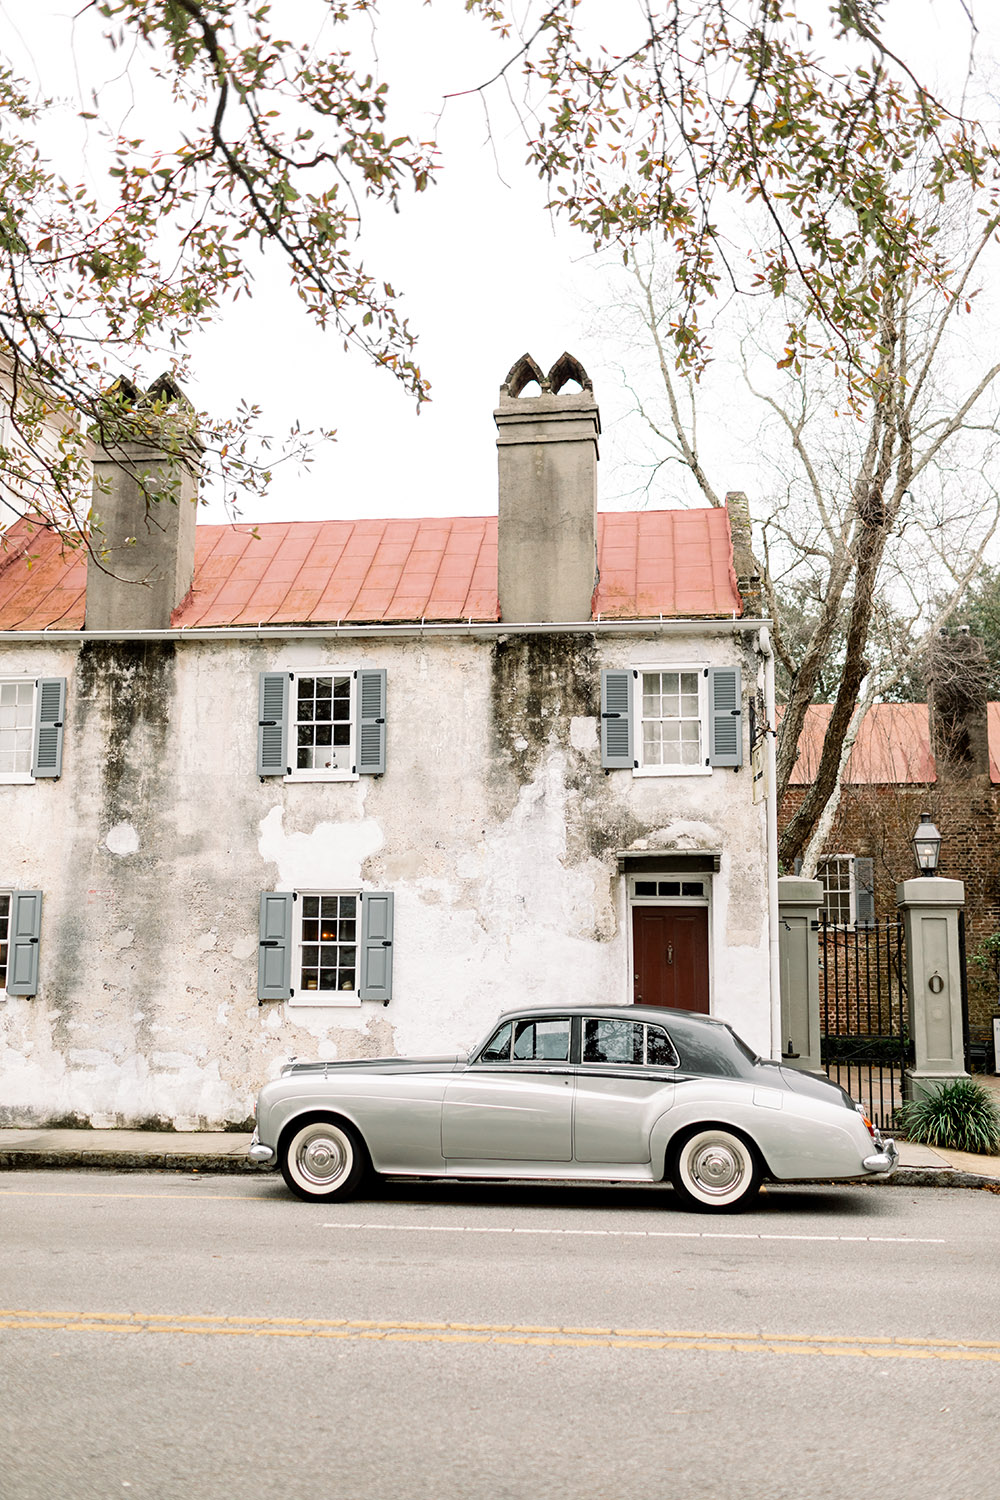 SC Express’ dove grey vintage ‘Silver Cloud’ car is the perfect getaway vehicle for the modern couple with nostalgic sensibilities.